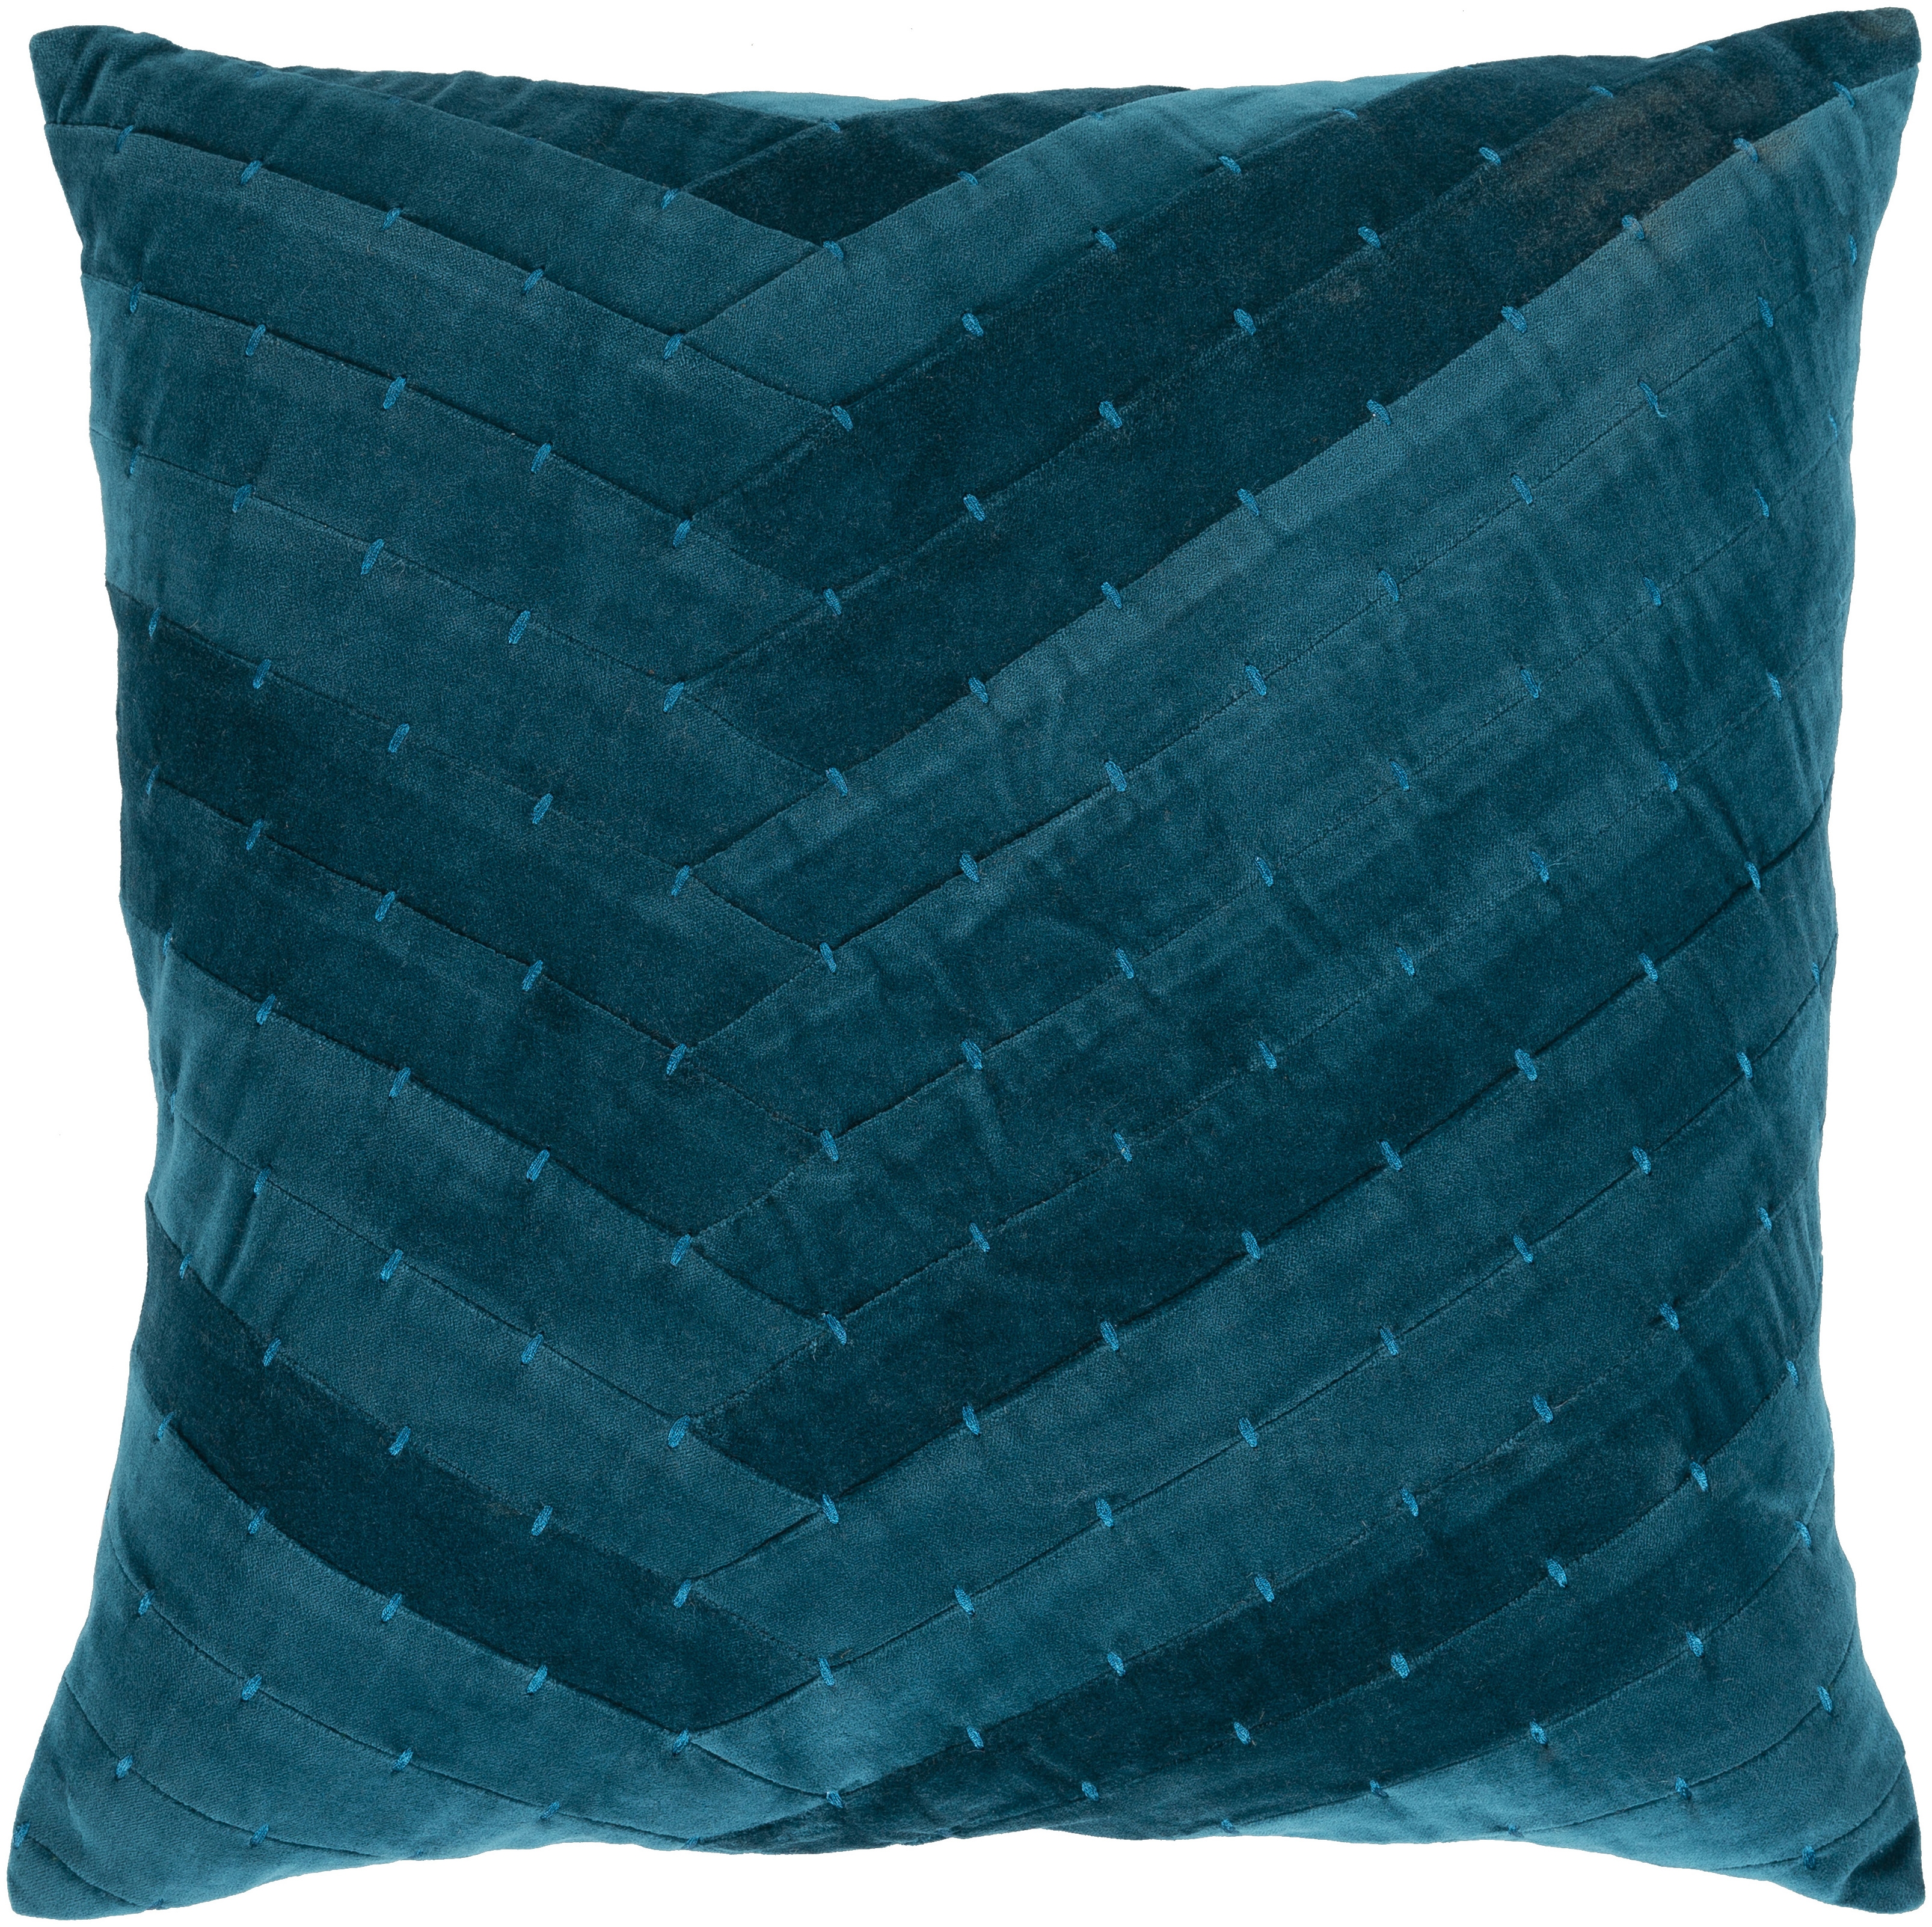 Aviana Throw Pillow, 22" x 22", pillow cover only - Image 0